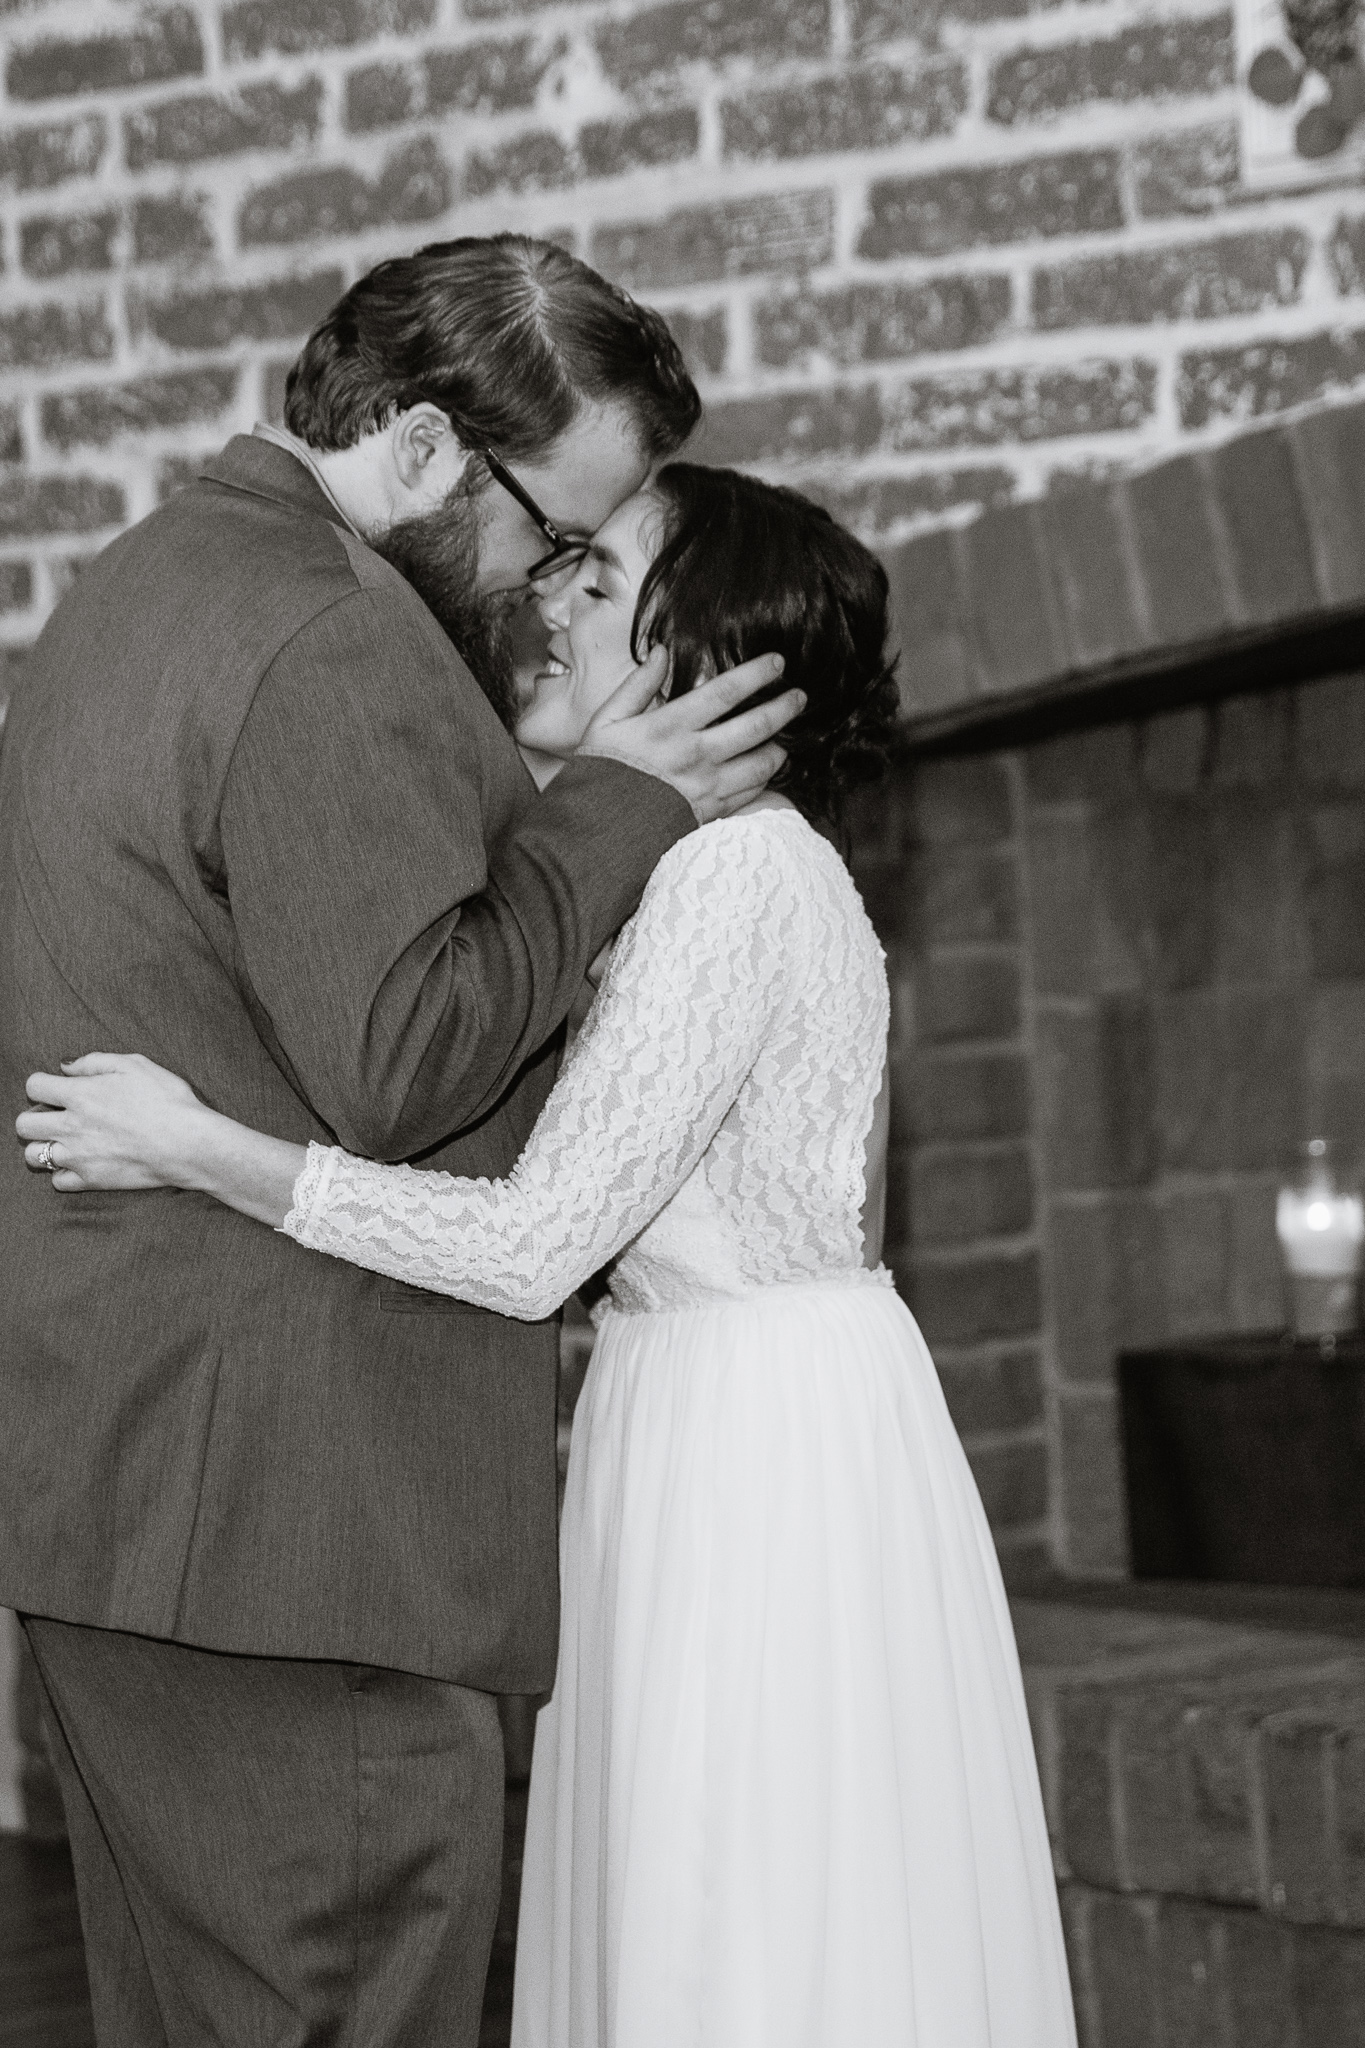 Bride and groom share an intimate moment during the first dance at their wedding reception.